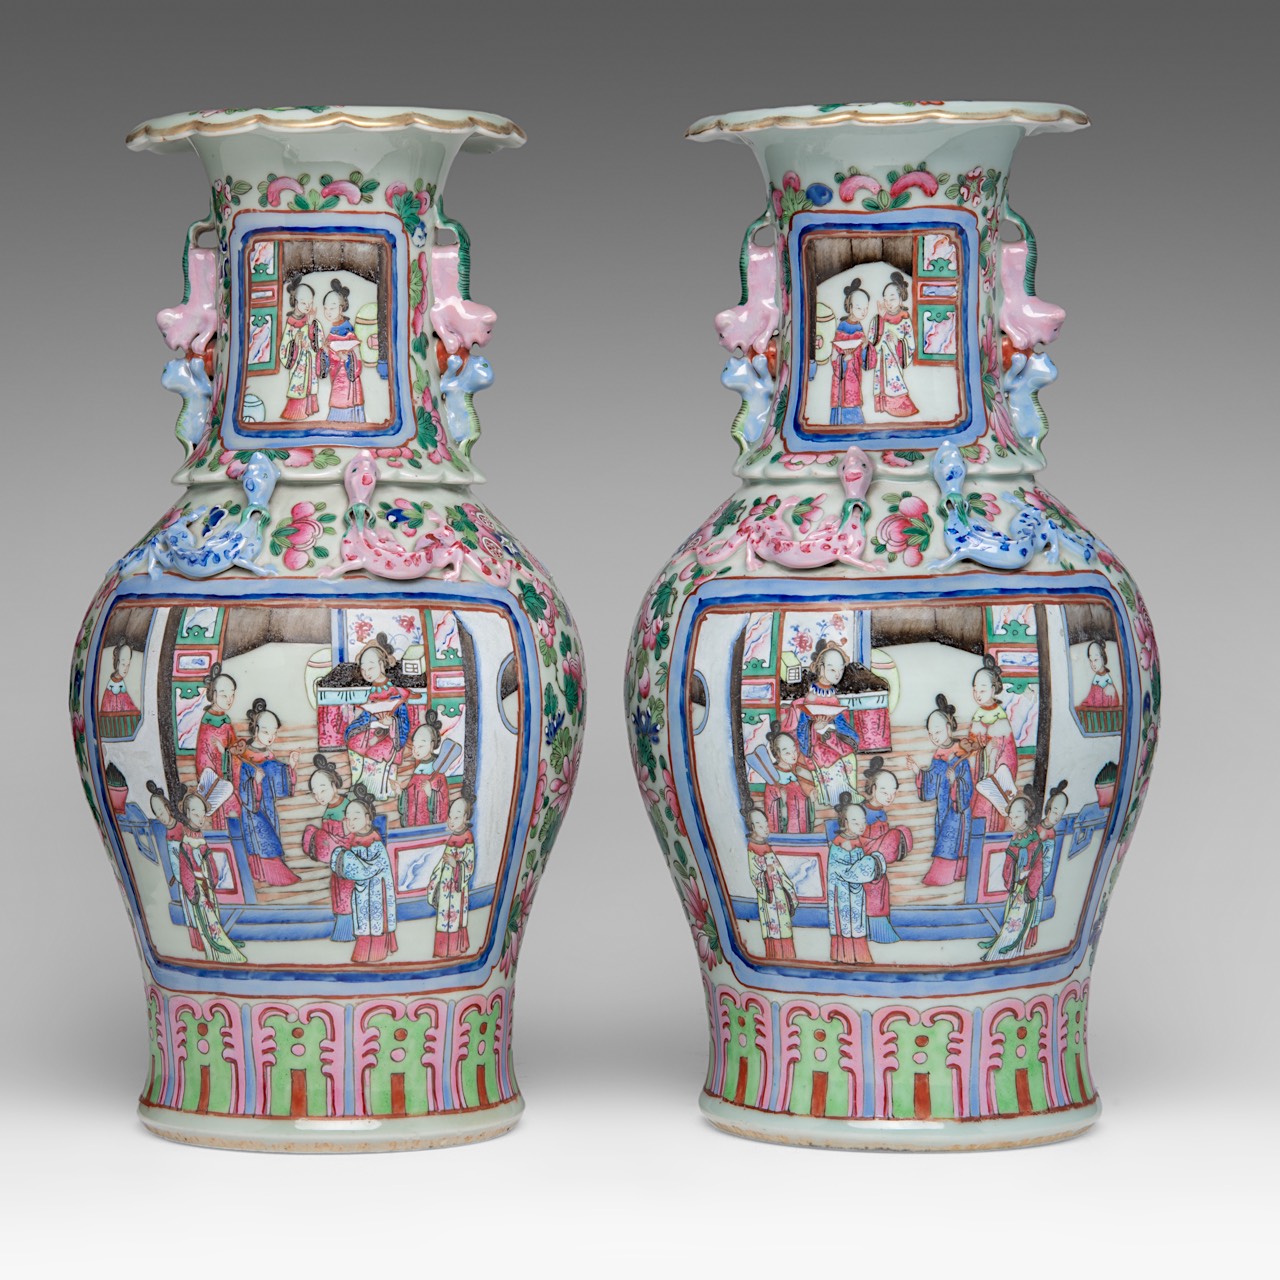 A fine pair of Chinese famille rose 'Beauties in a Chamber' vases, 19thC, H 44 cm - Image 3 of 6